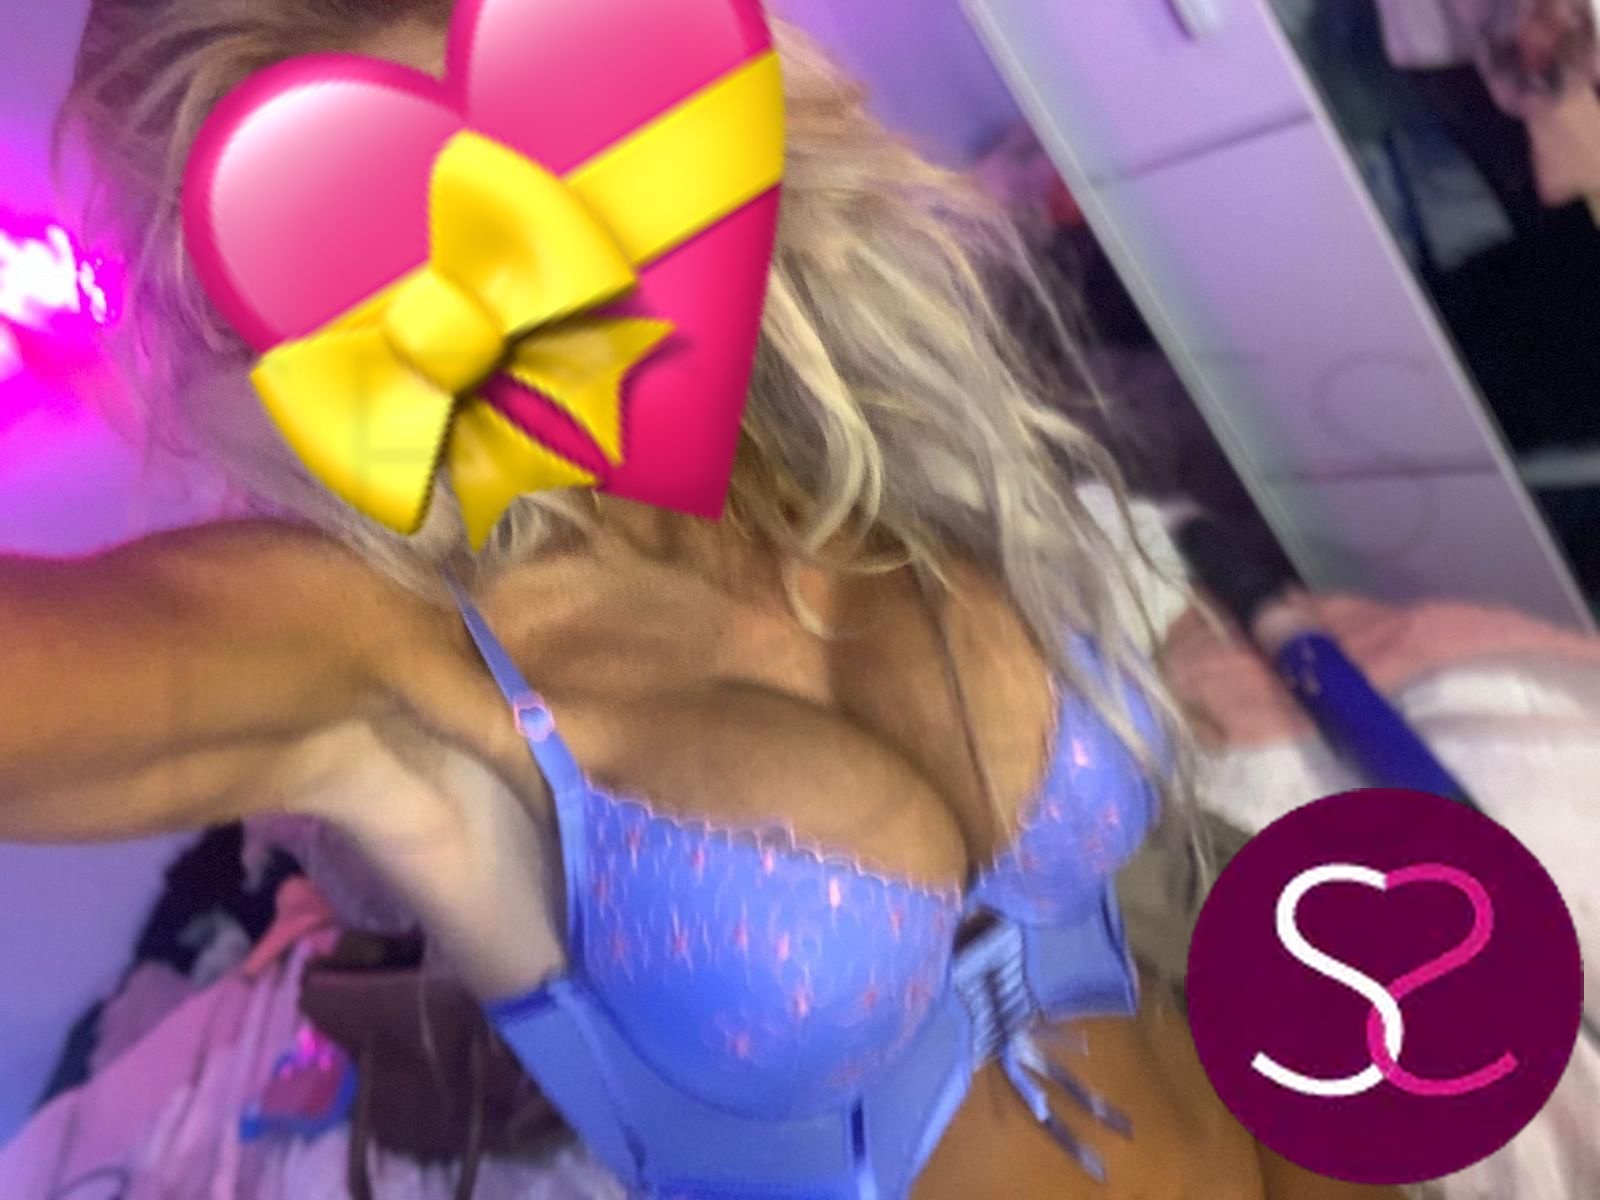 CHECK OUT OUR NEW SEXY BUSTY BLONDE WHO IS PROVING TO BE VERY
POPULAR..EVERYONE MEET CASSIE
SIX 6 FIGURE WITH 28HH BUST
SUPER SEXY AND FUN FUN FUN 
